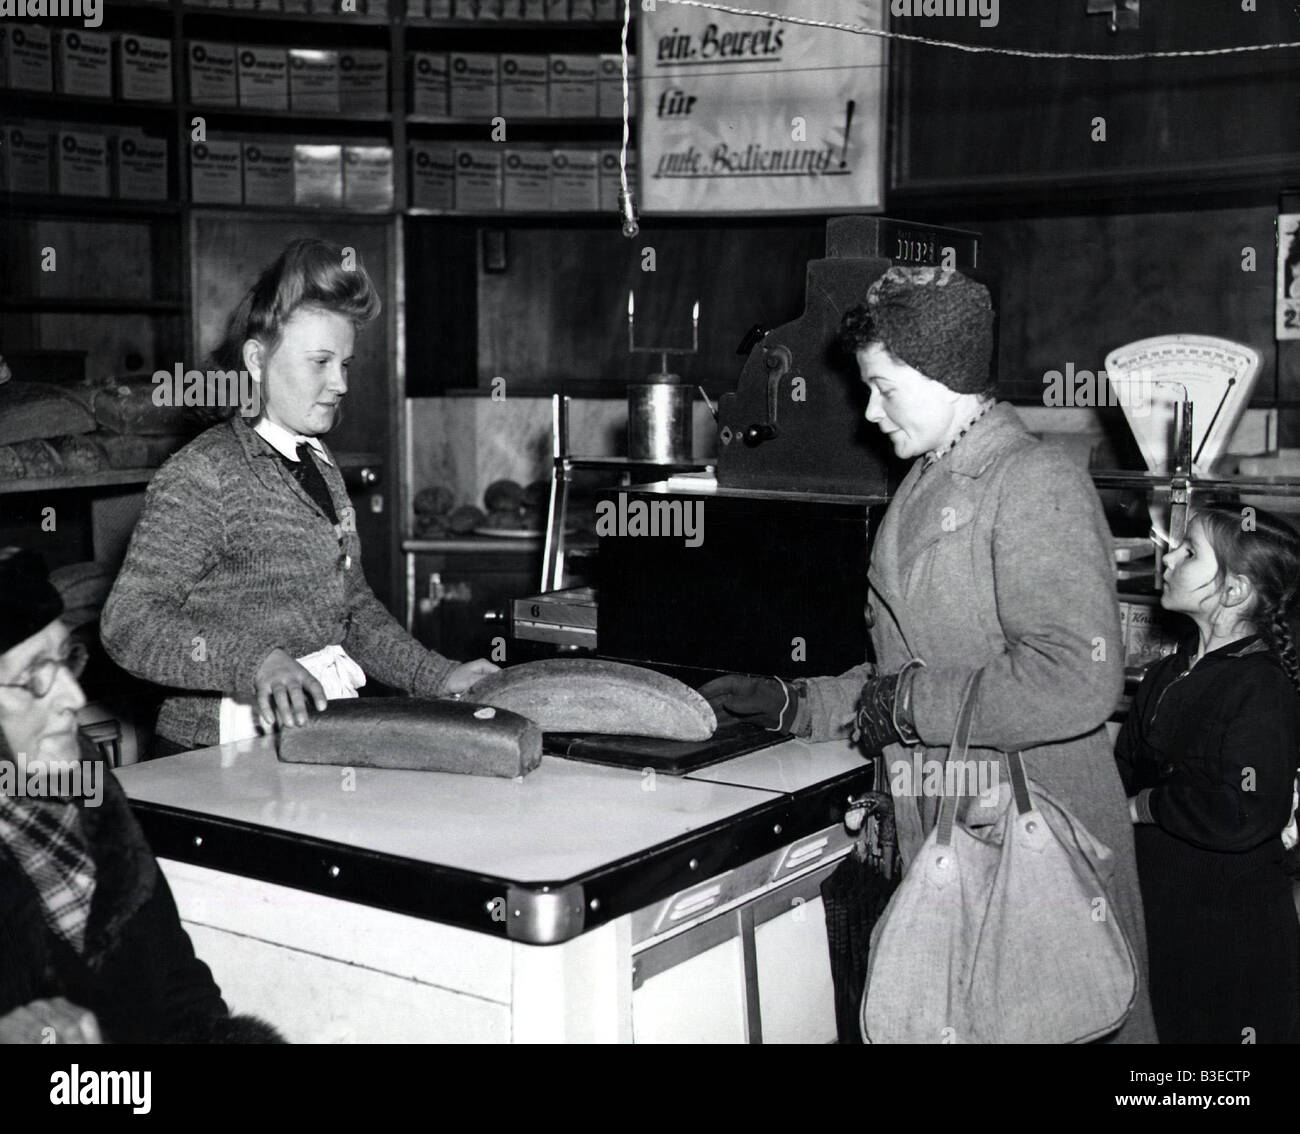 geography / travel, Germany, Berlin, Blockade 1948 / 1949, woman buying bread at a bakery, 24.11.1948, historic, historical, Europe, 1940s, 40s, Berlin-Blockade, postwar period, comestibles, food, selling, corner shop, store, retailing, female, woman, women, people, 20th century, Stock Photo